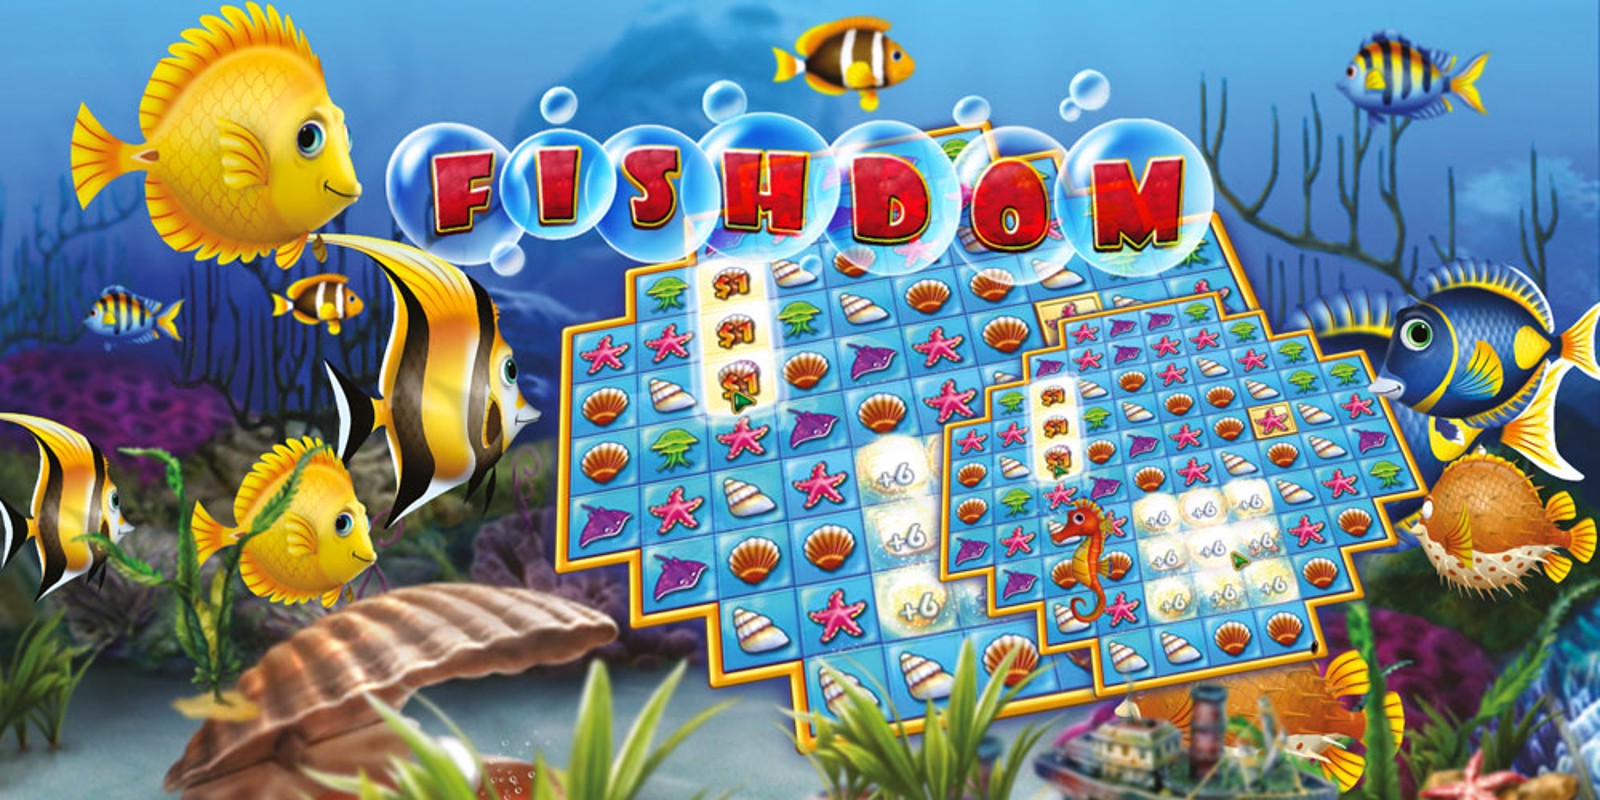 fishdom free game for samsung smart phone